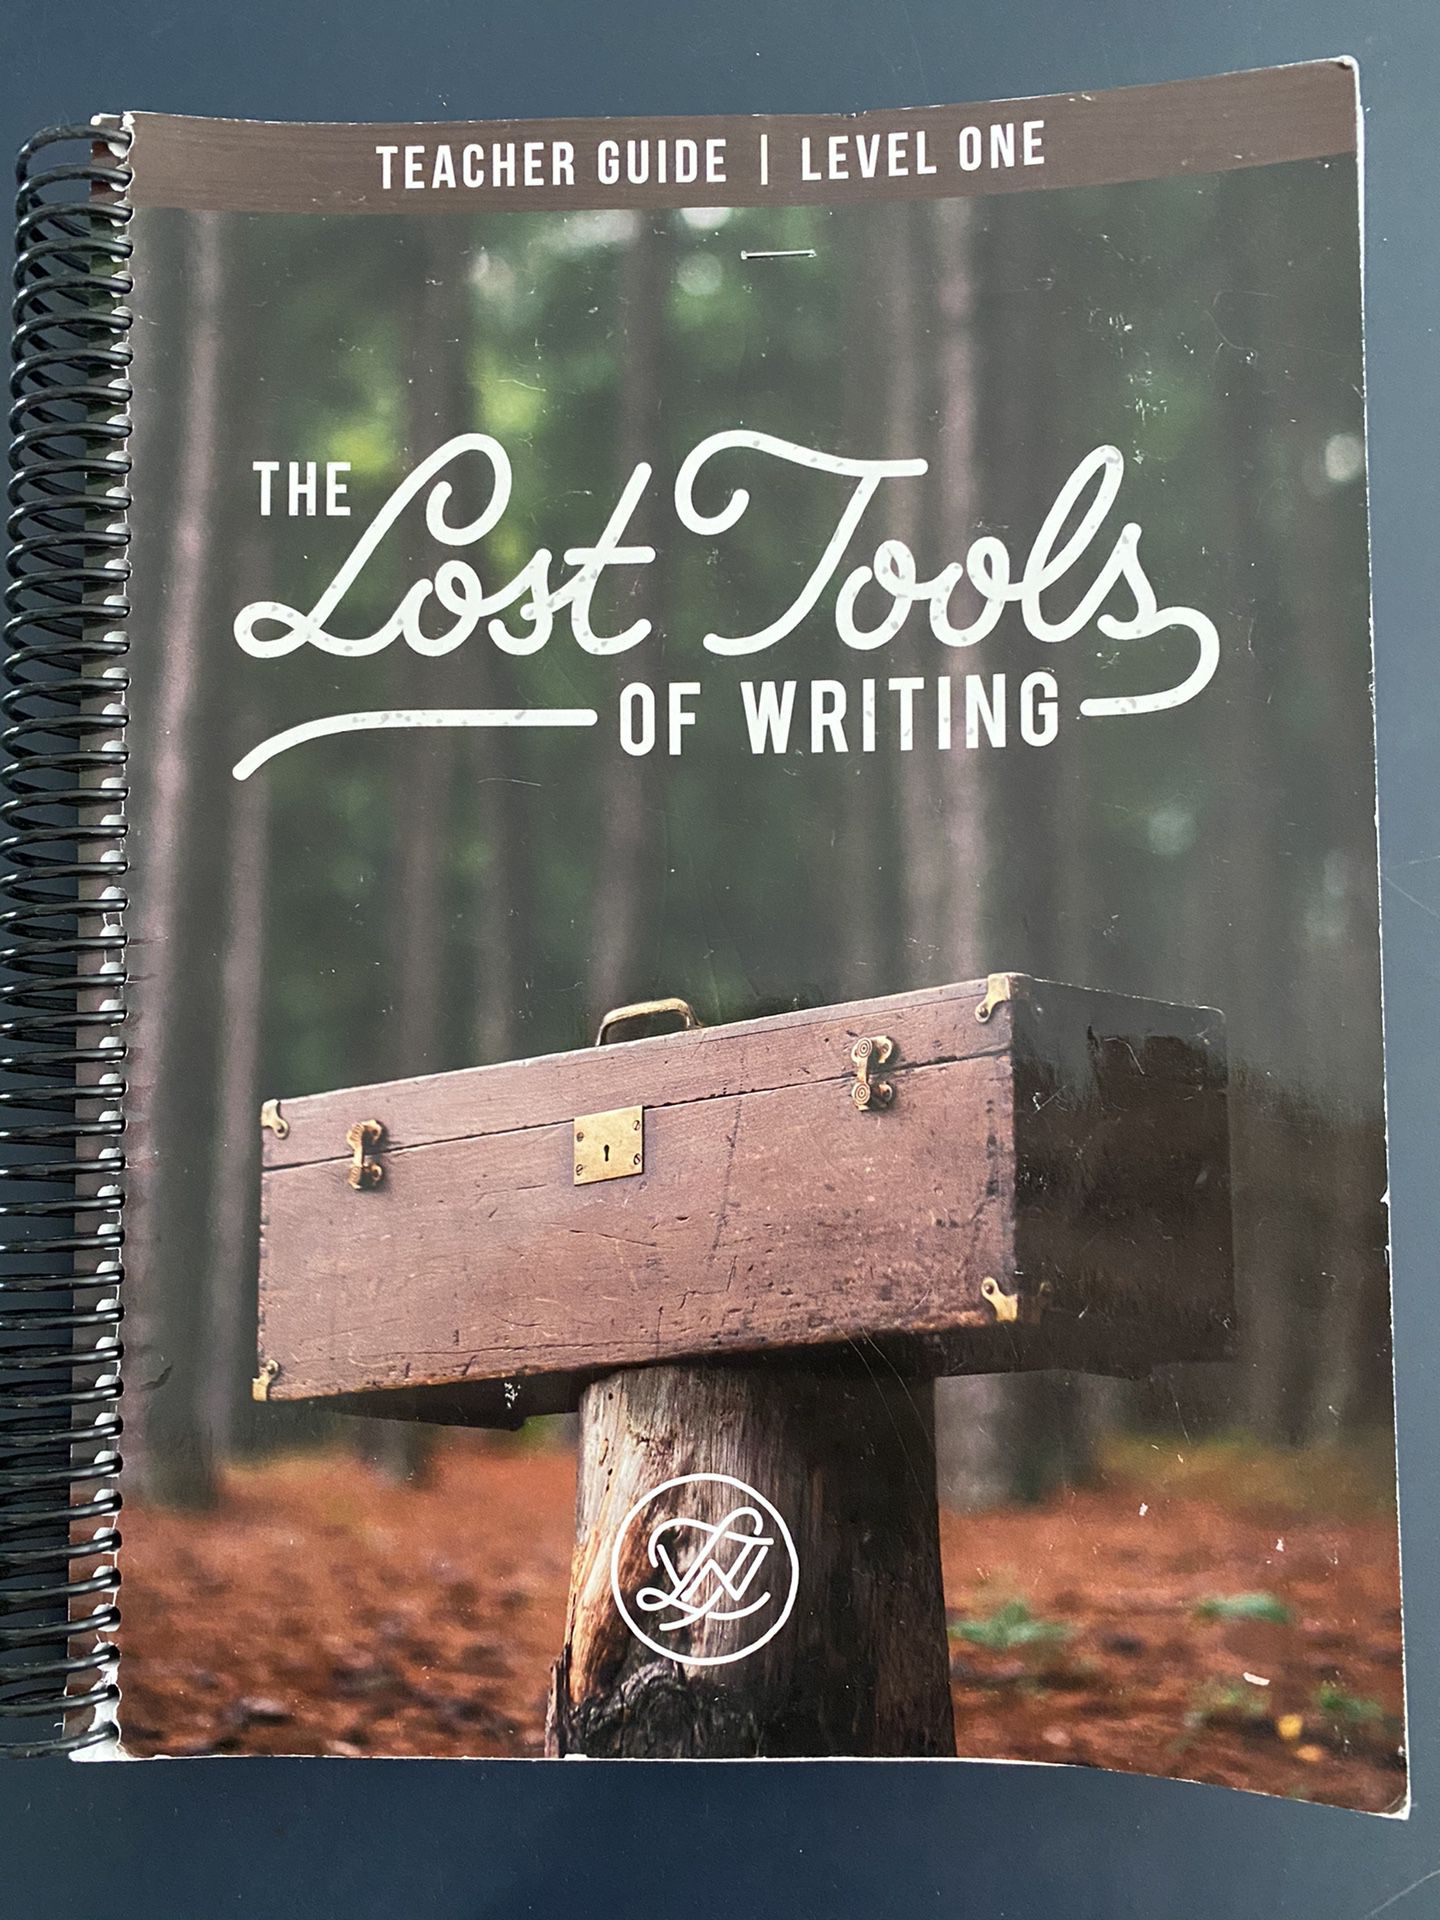 OfferUp　only.　Sale　Corona,　Lost　Writing　in　Tools　for　Guide　of　Teachers　CA